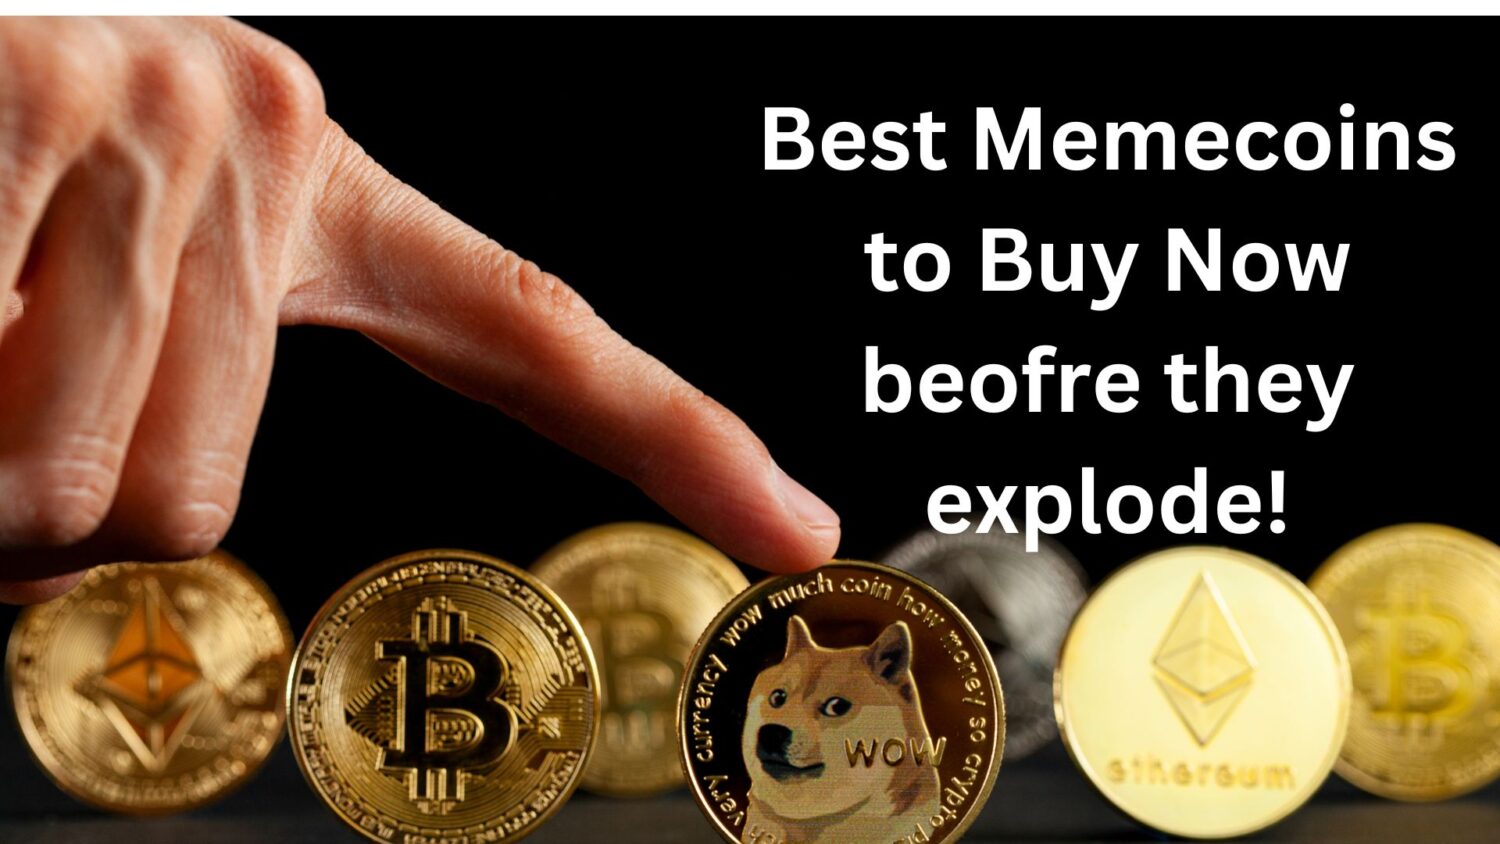 Top 3 Best Meme Coins To Buy Now